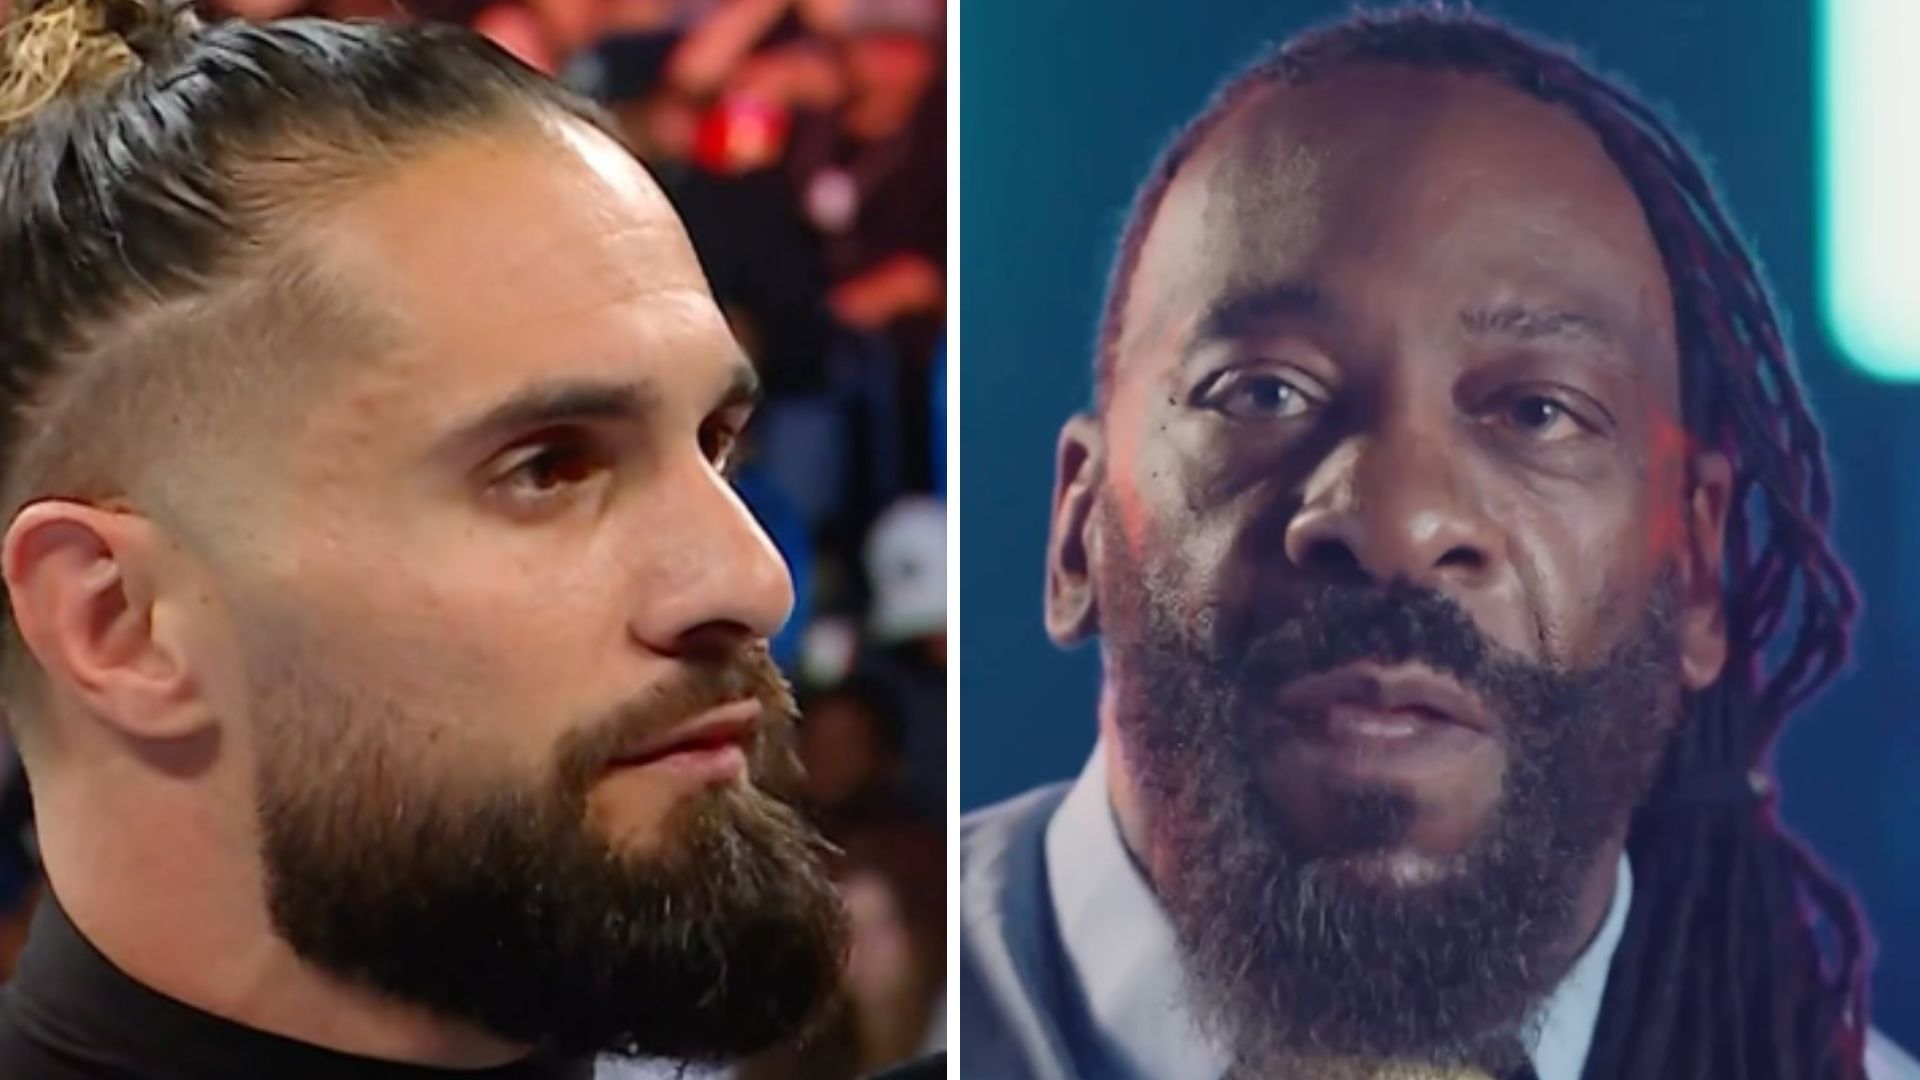 Seth Rollins on the left and Booker T on the right [Image credits: stars